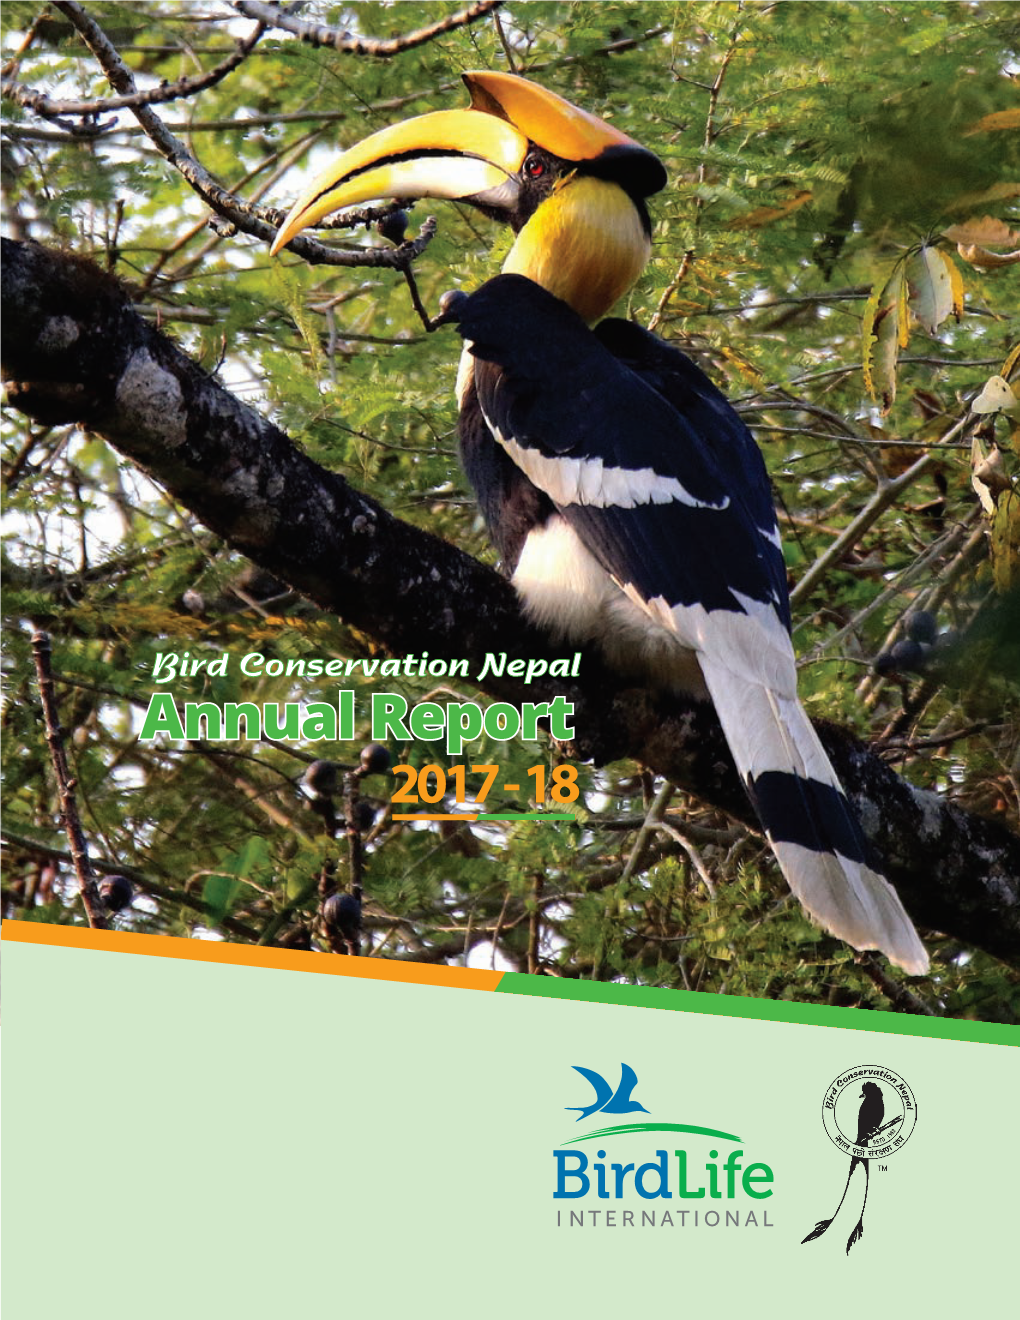 Annual Report 2017 - 18 BIRD CONSERVATION NEPAL II ANNUAL REPORT 2017-18